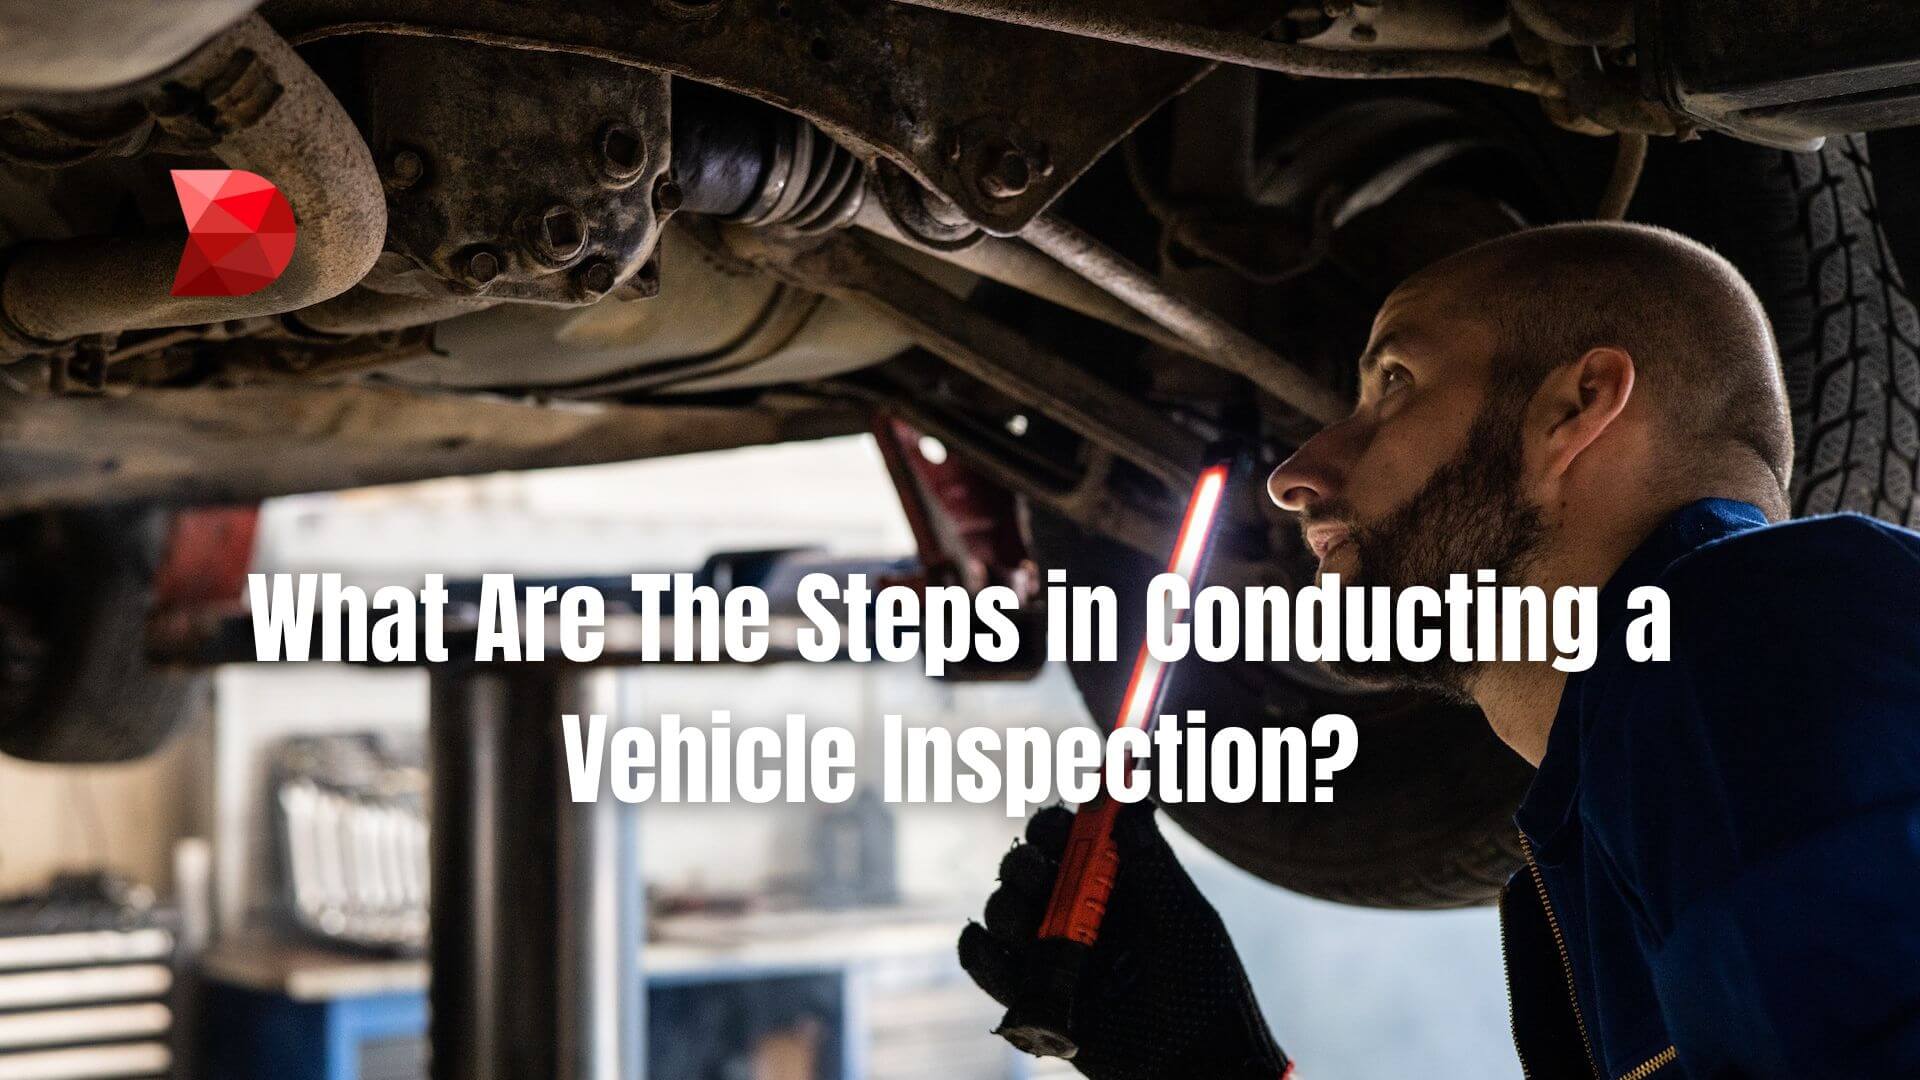 Vehicle insurance cannot exist without the inspection procedure. Here are the steps involved in conducting a vehicle inspection.